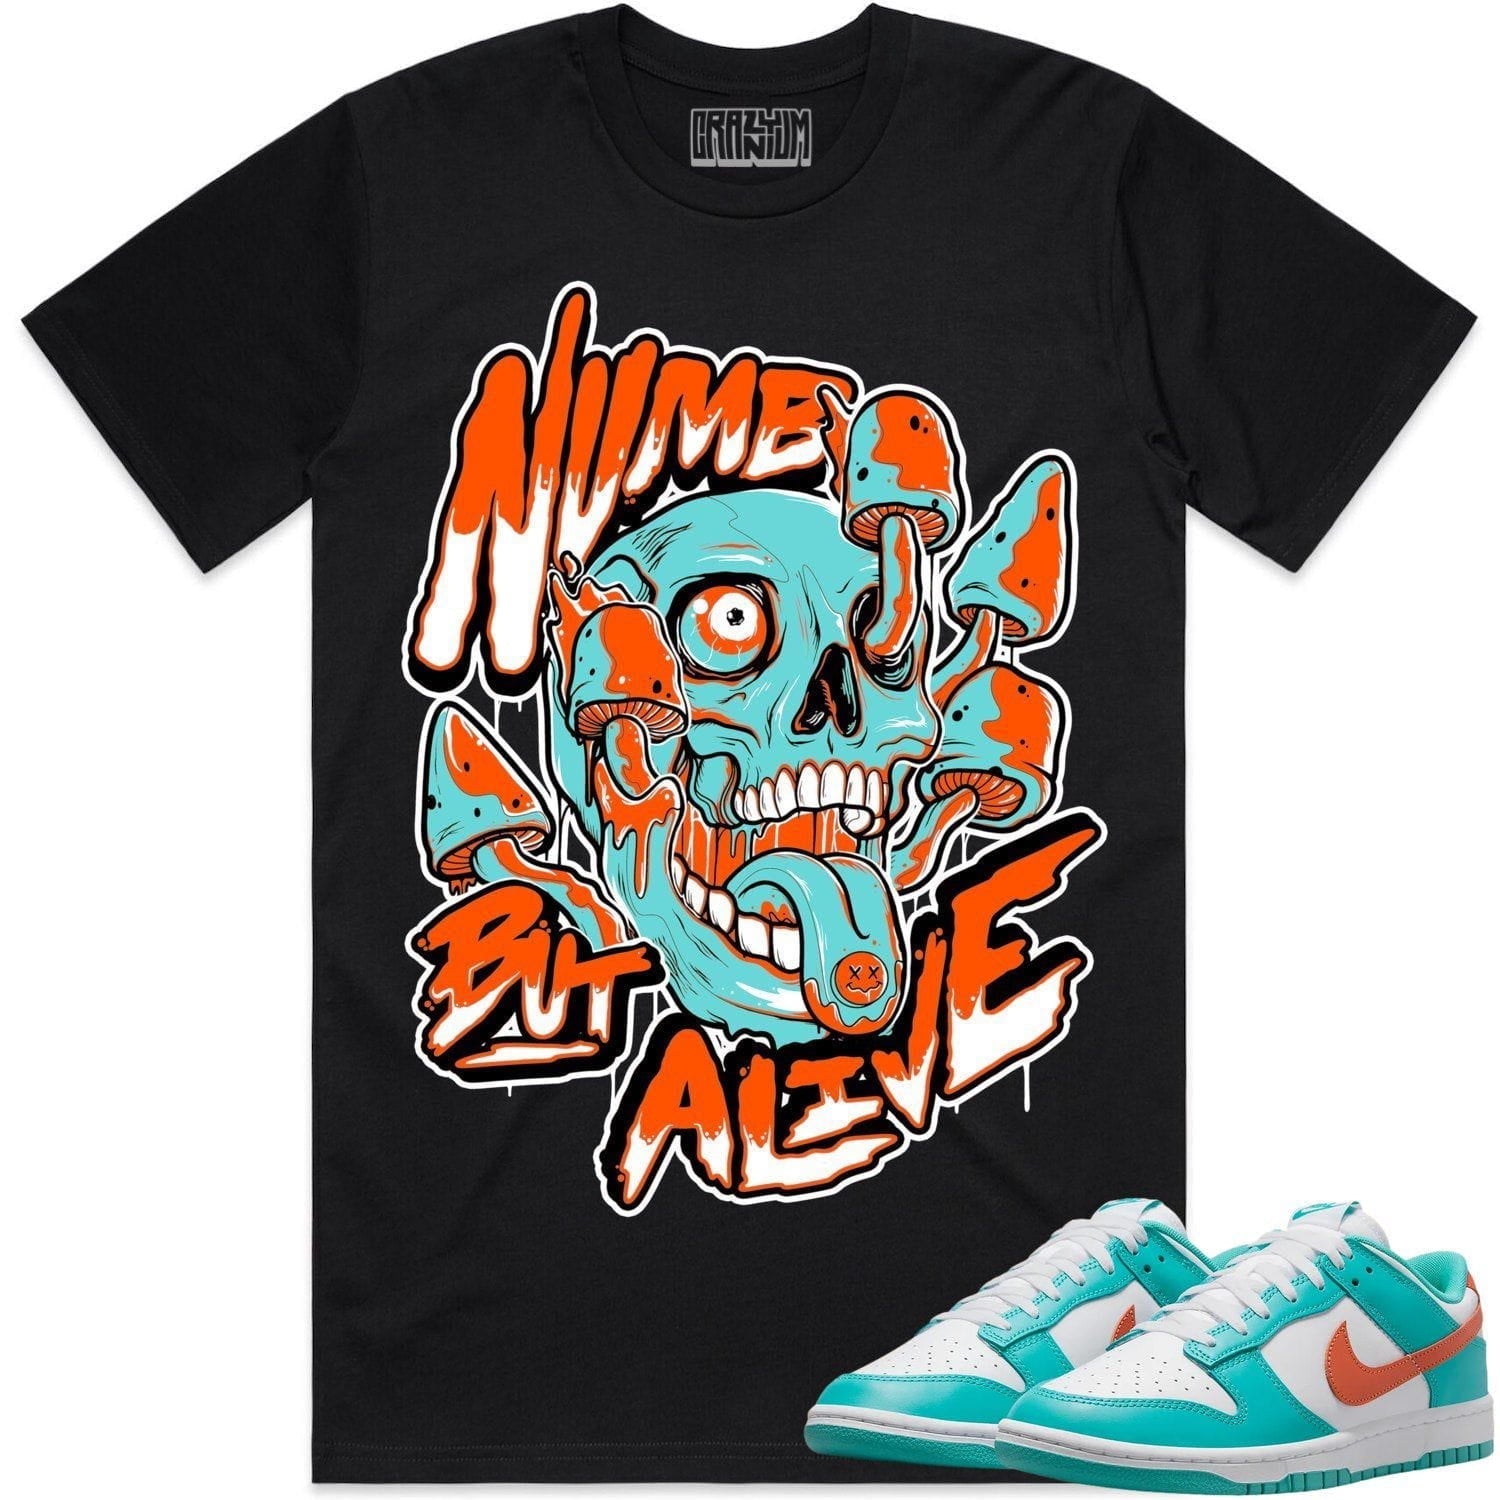 Miami Dolphin Dunks Shirts- Dunks Sneaker Tees - Miami Numb but Alive